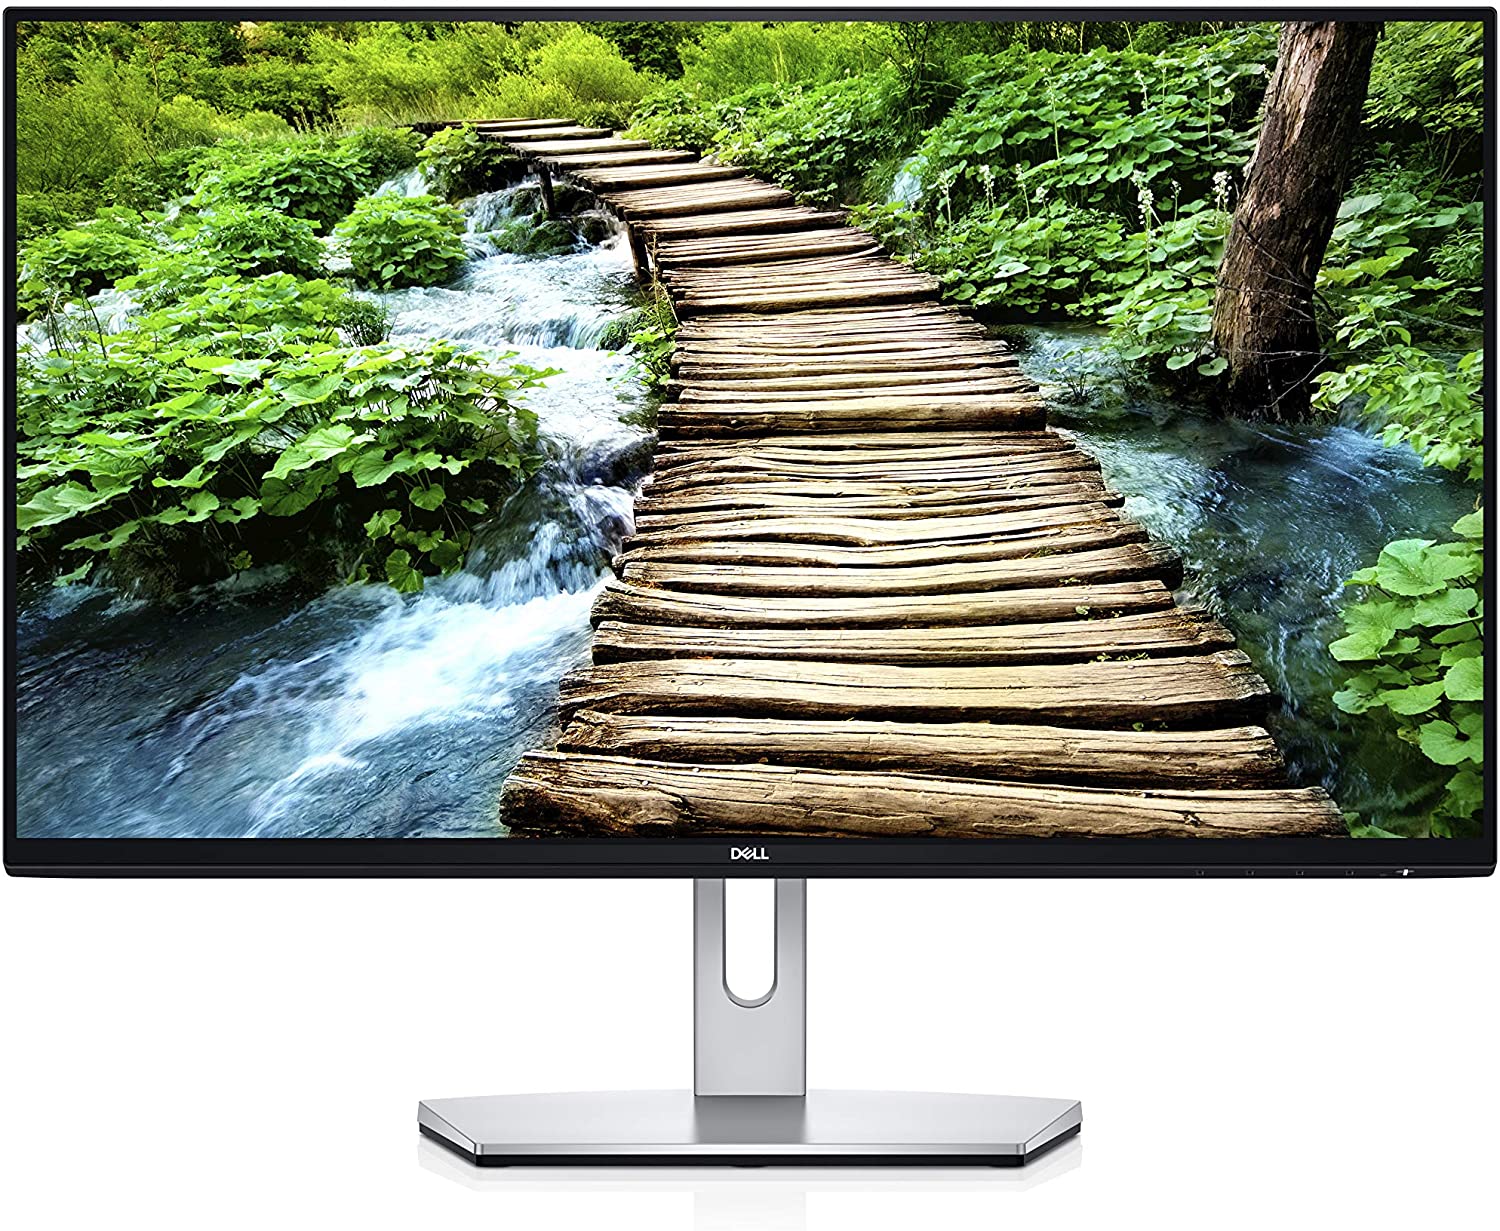 The Dell S2419H S Series monitor featuring a desktop background with a nature scene.